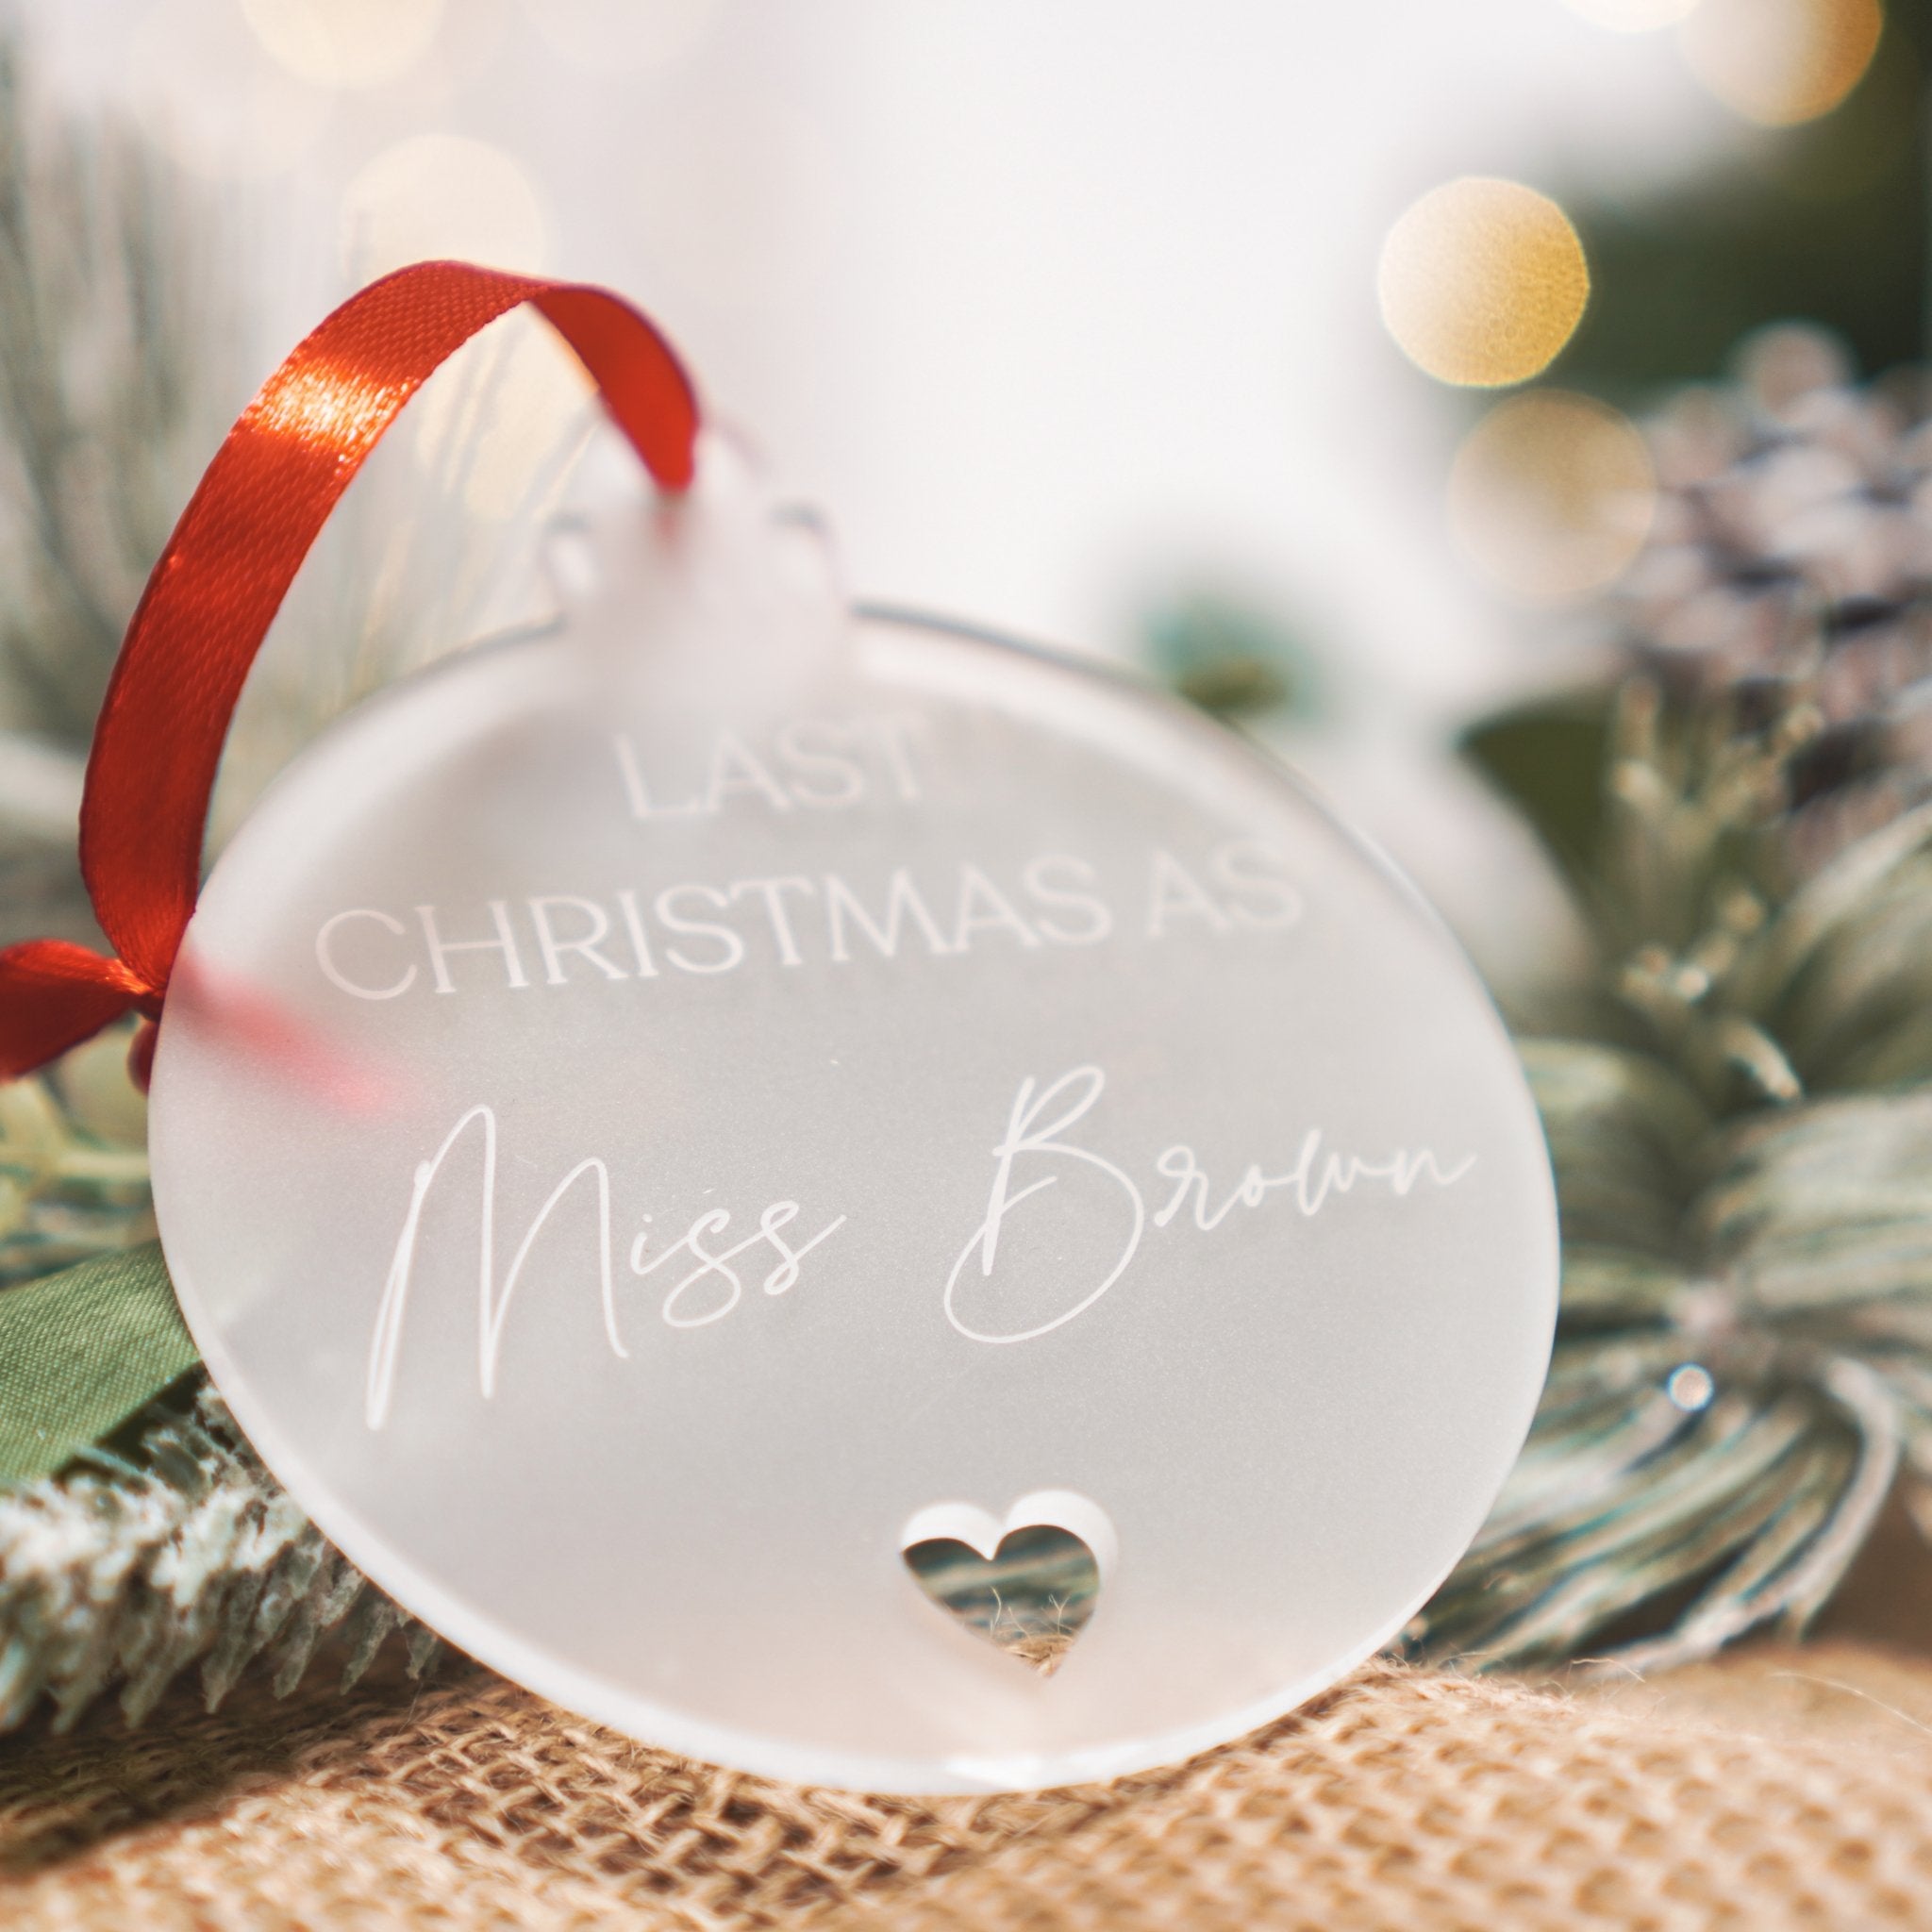 last Christmas as a mass personalised Christmas ornament decoration